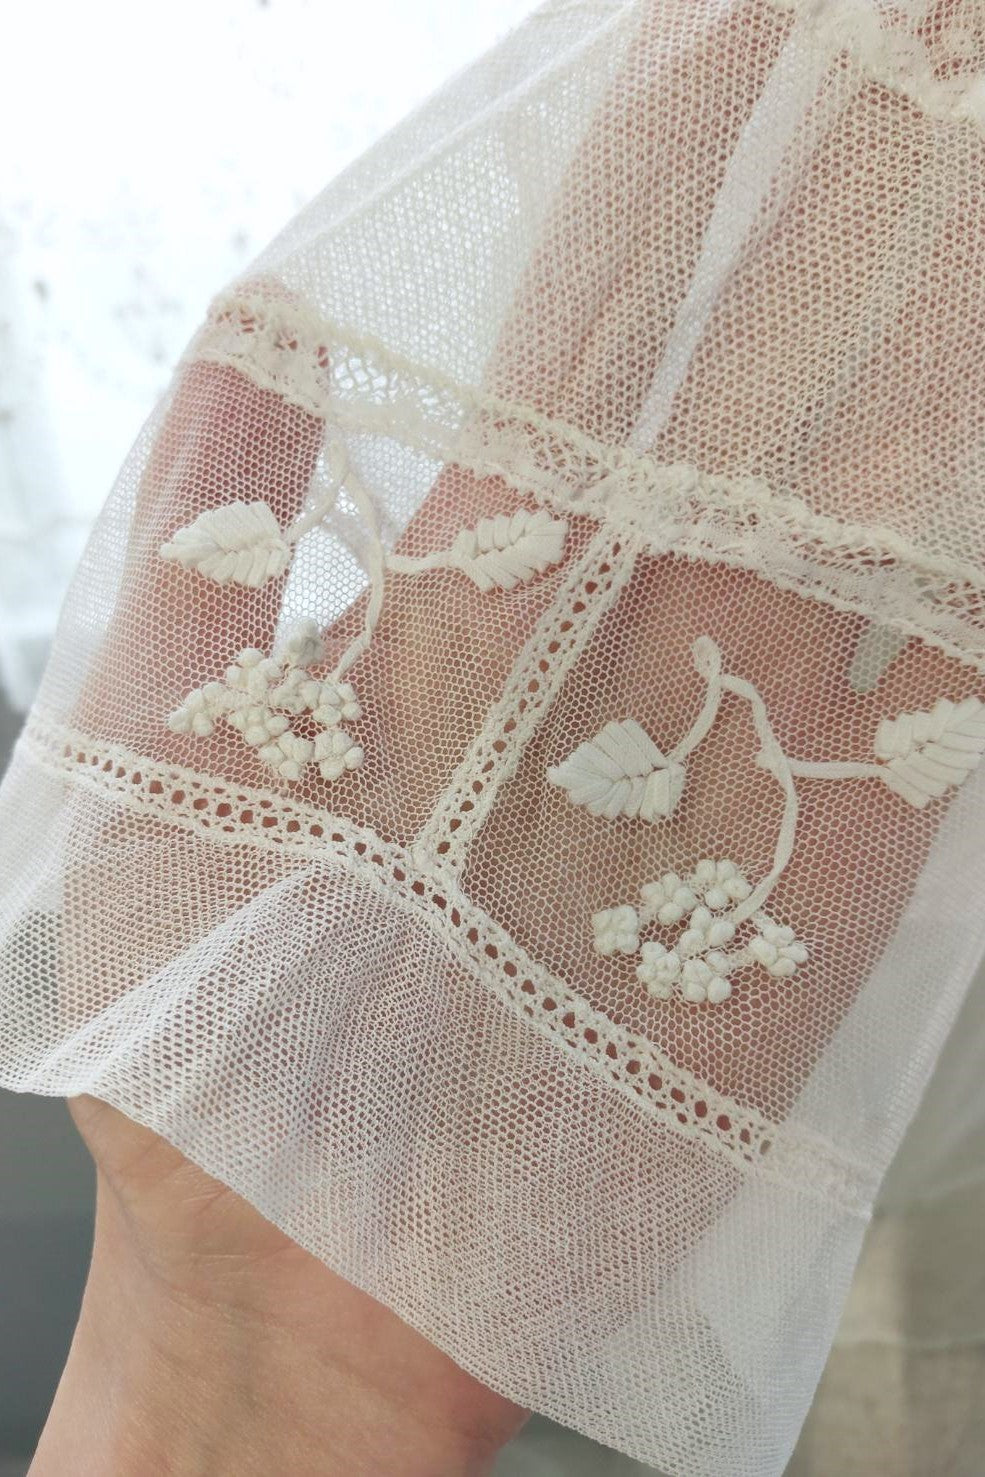 1930s Embroidered Tulle Blouse